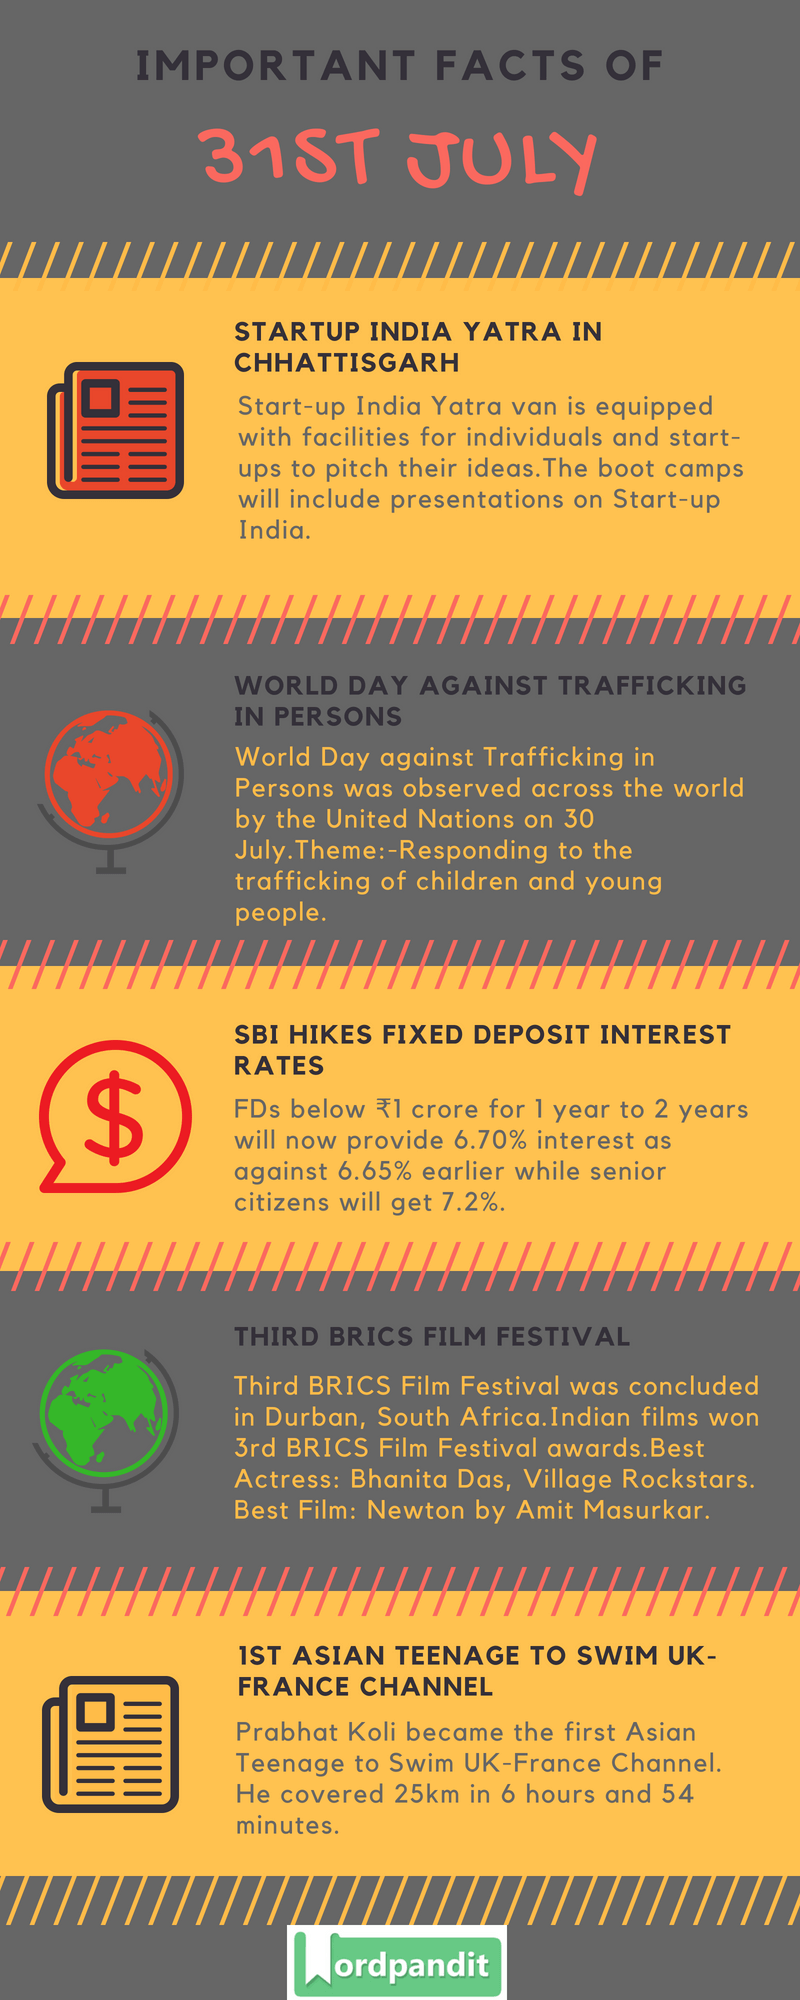 Daily Current Affairs 31 July 2018 Current Affairs Quiz July 31 2018 Current Affairs Infographic